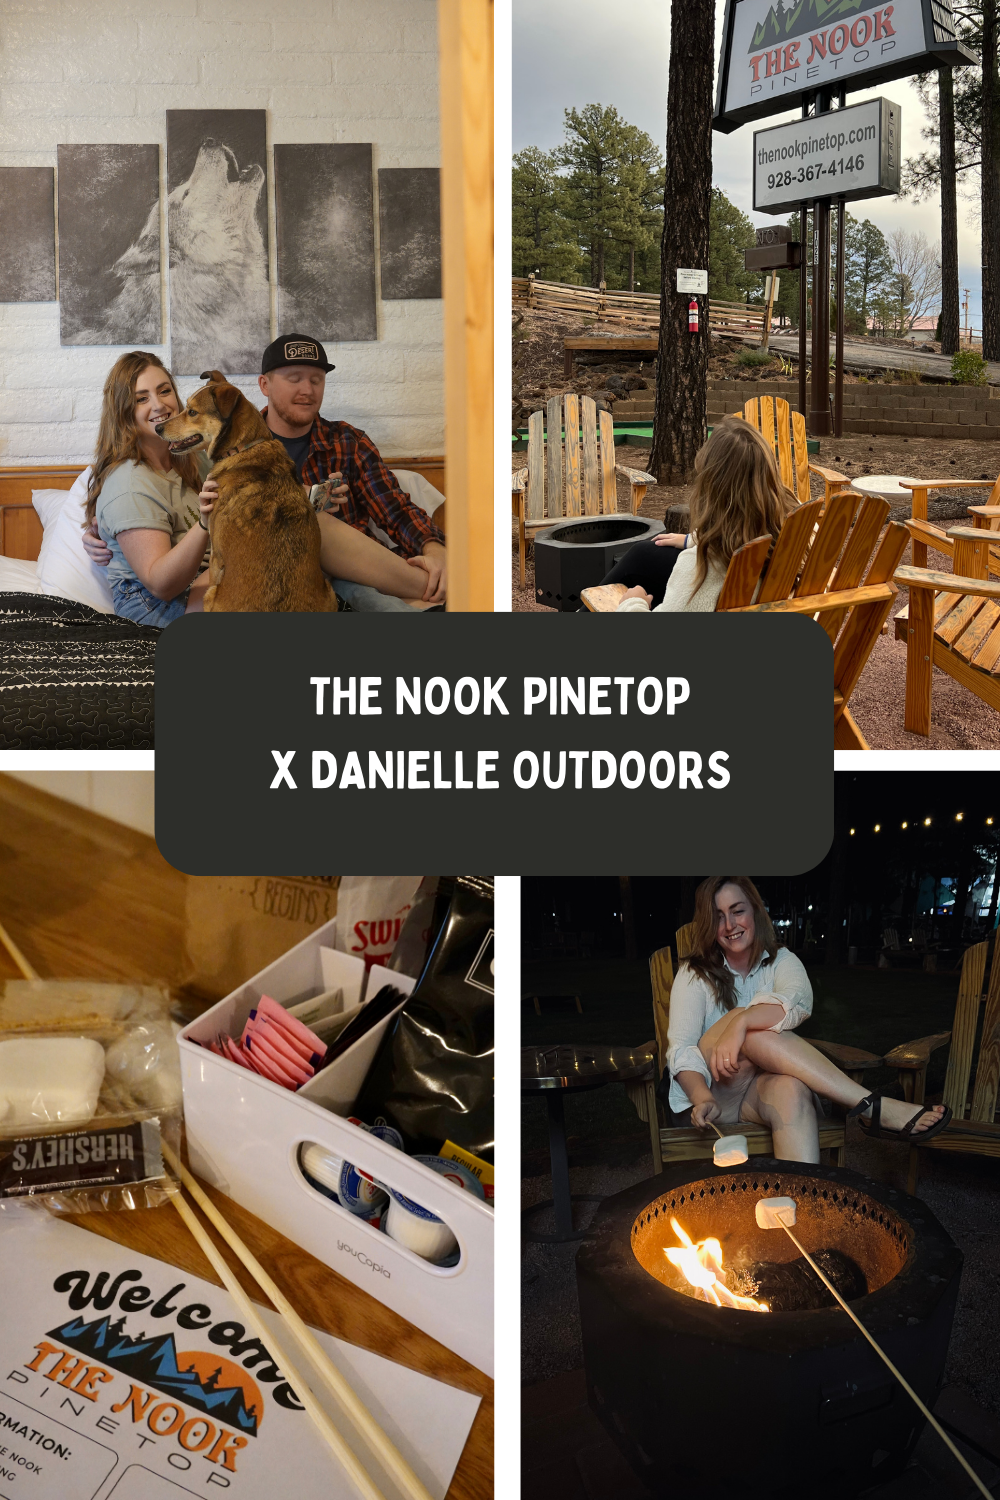 dainelle outdoors partnered with the nook pinetop